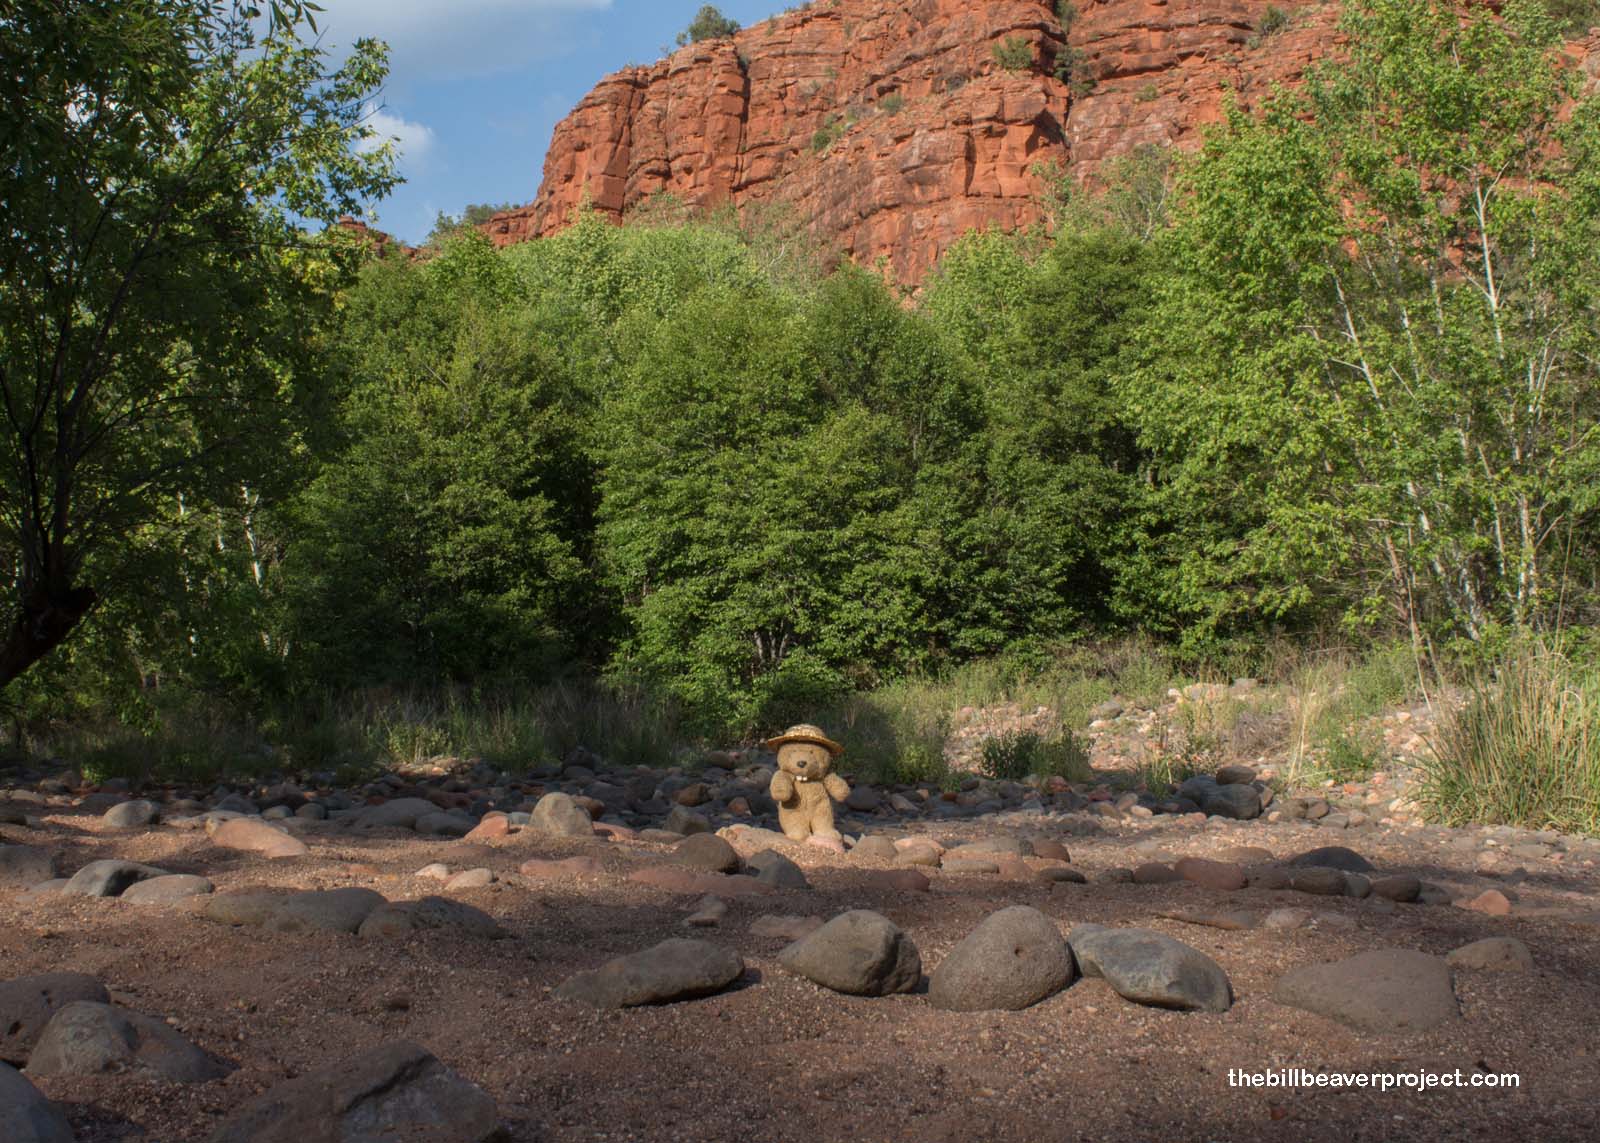 The Mysterious Vortices of Sedona